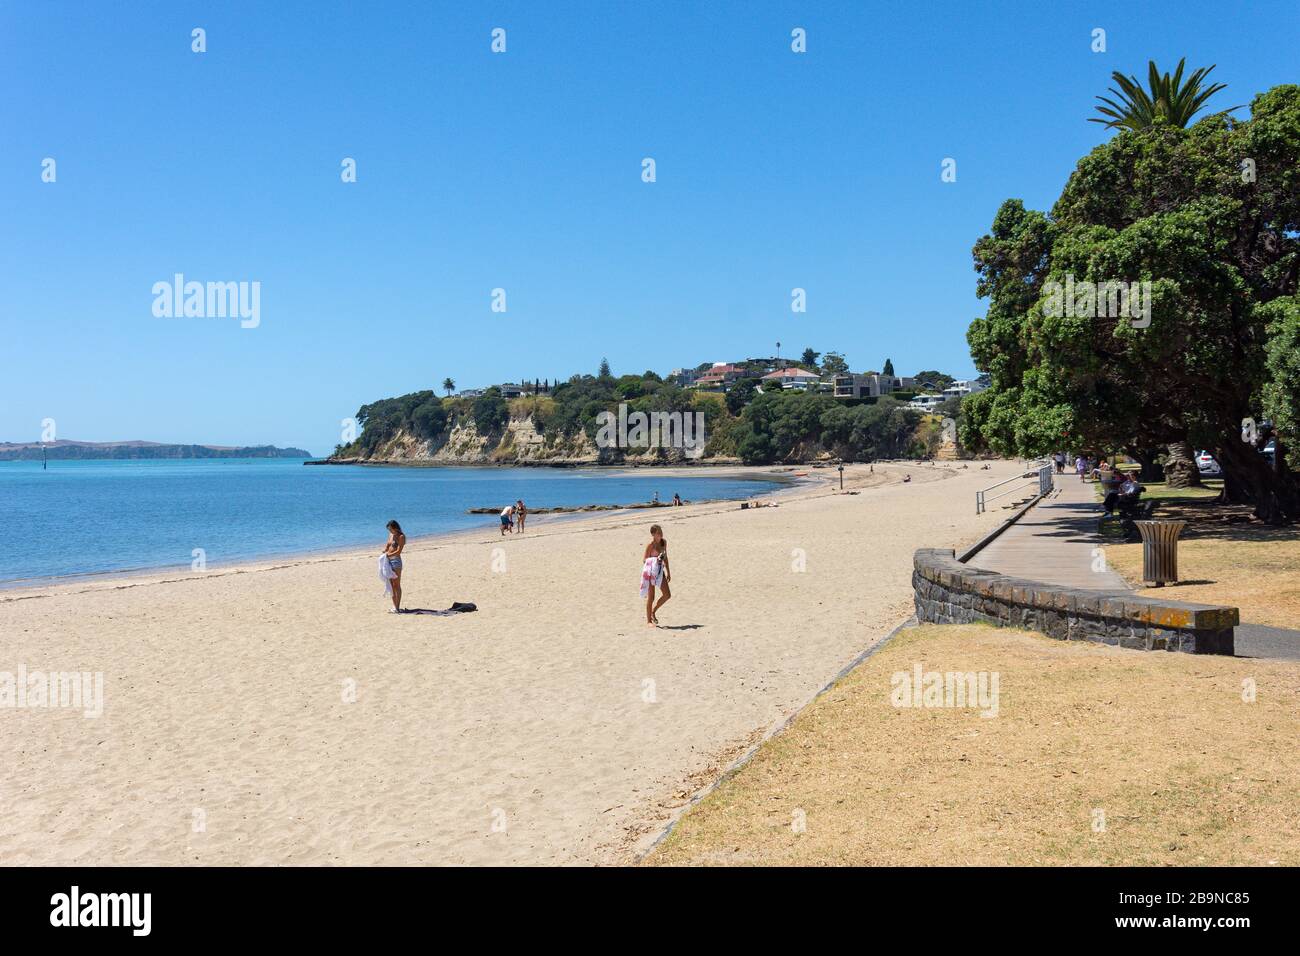 The boardwalk and beach, St Heliers Beach, Tamaki Drive, St Heliers, Auckland, New Zealand Stock Photo